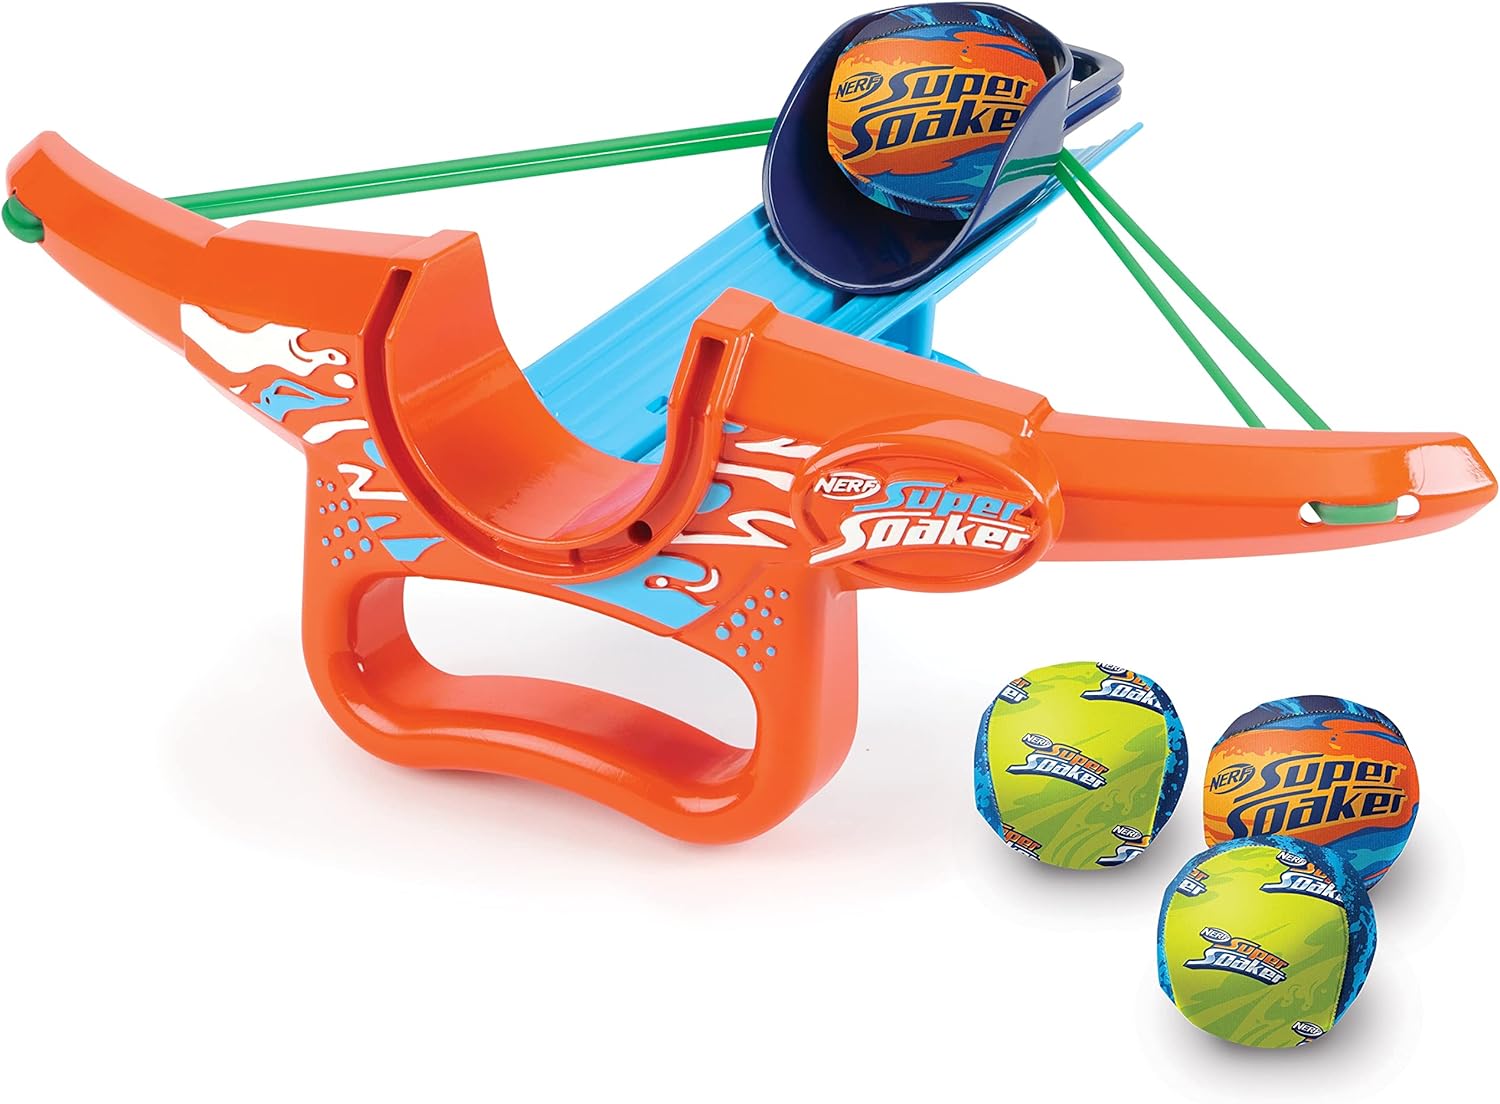 My kids had a blast with this wrist rocket! Lots of fun on hot days and a nice alternative to water balloons. The balls are soft and very lightweight when dry so good for indoor fun as well!